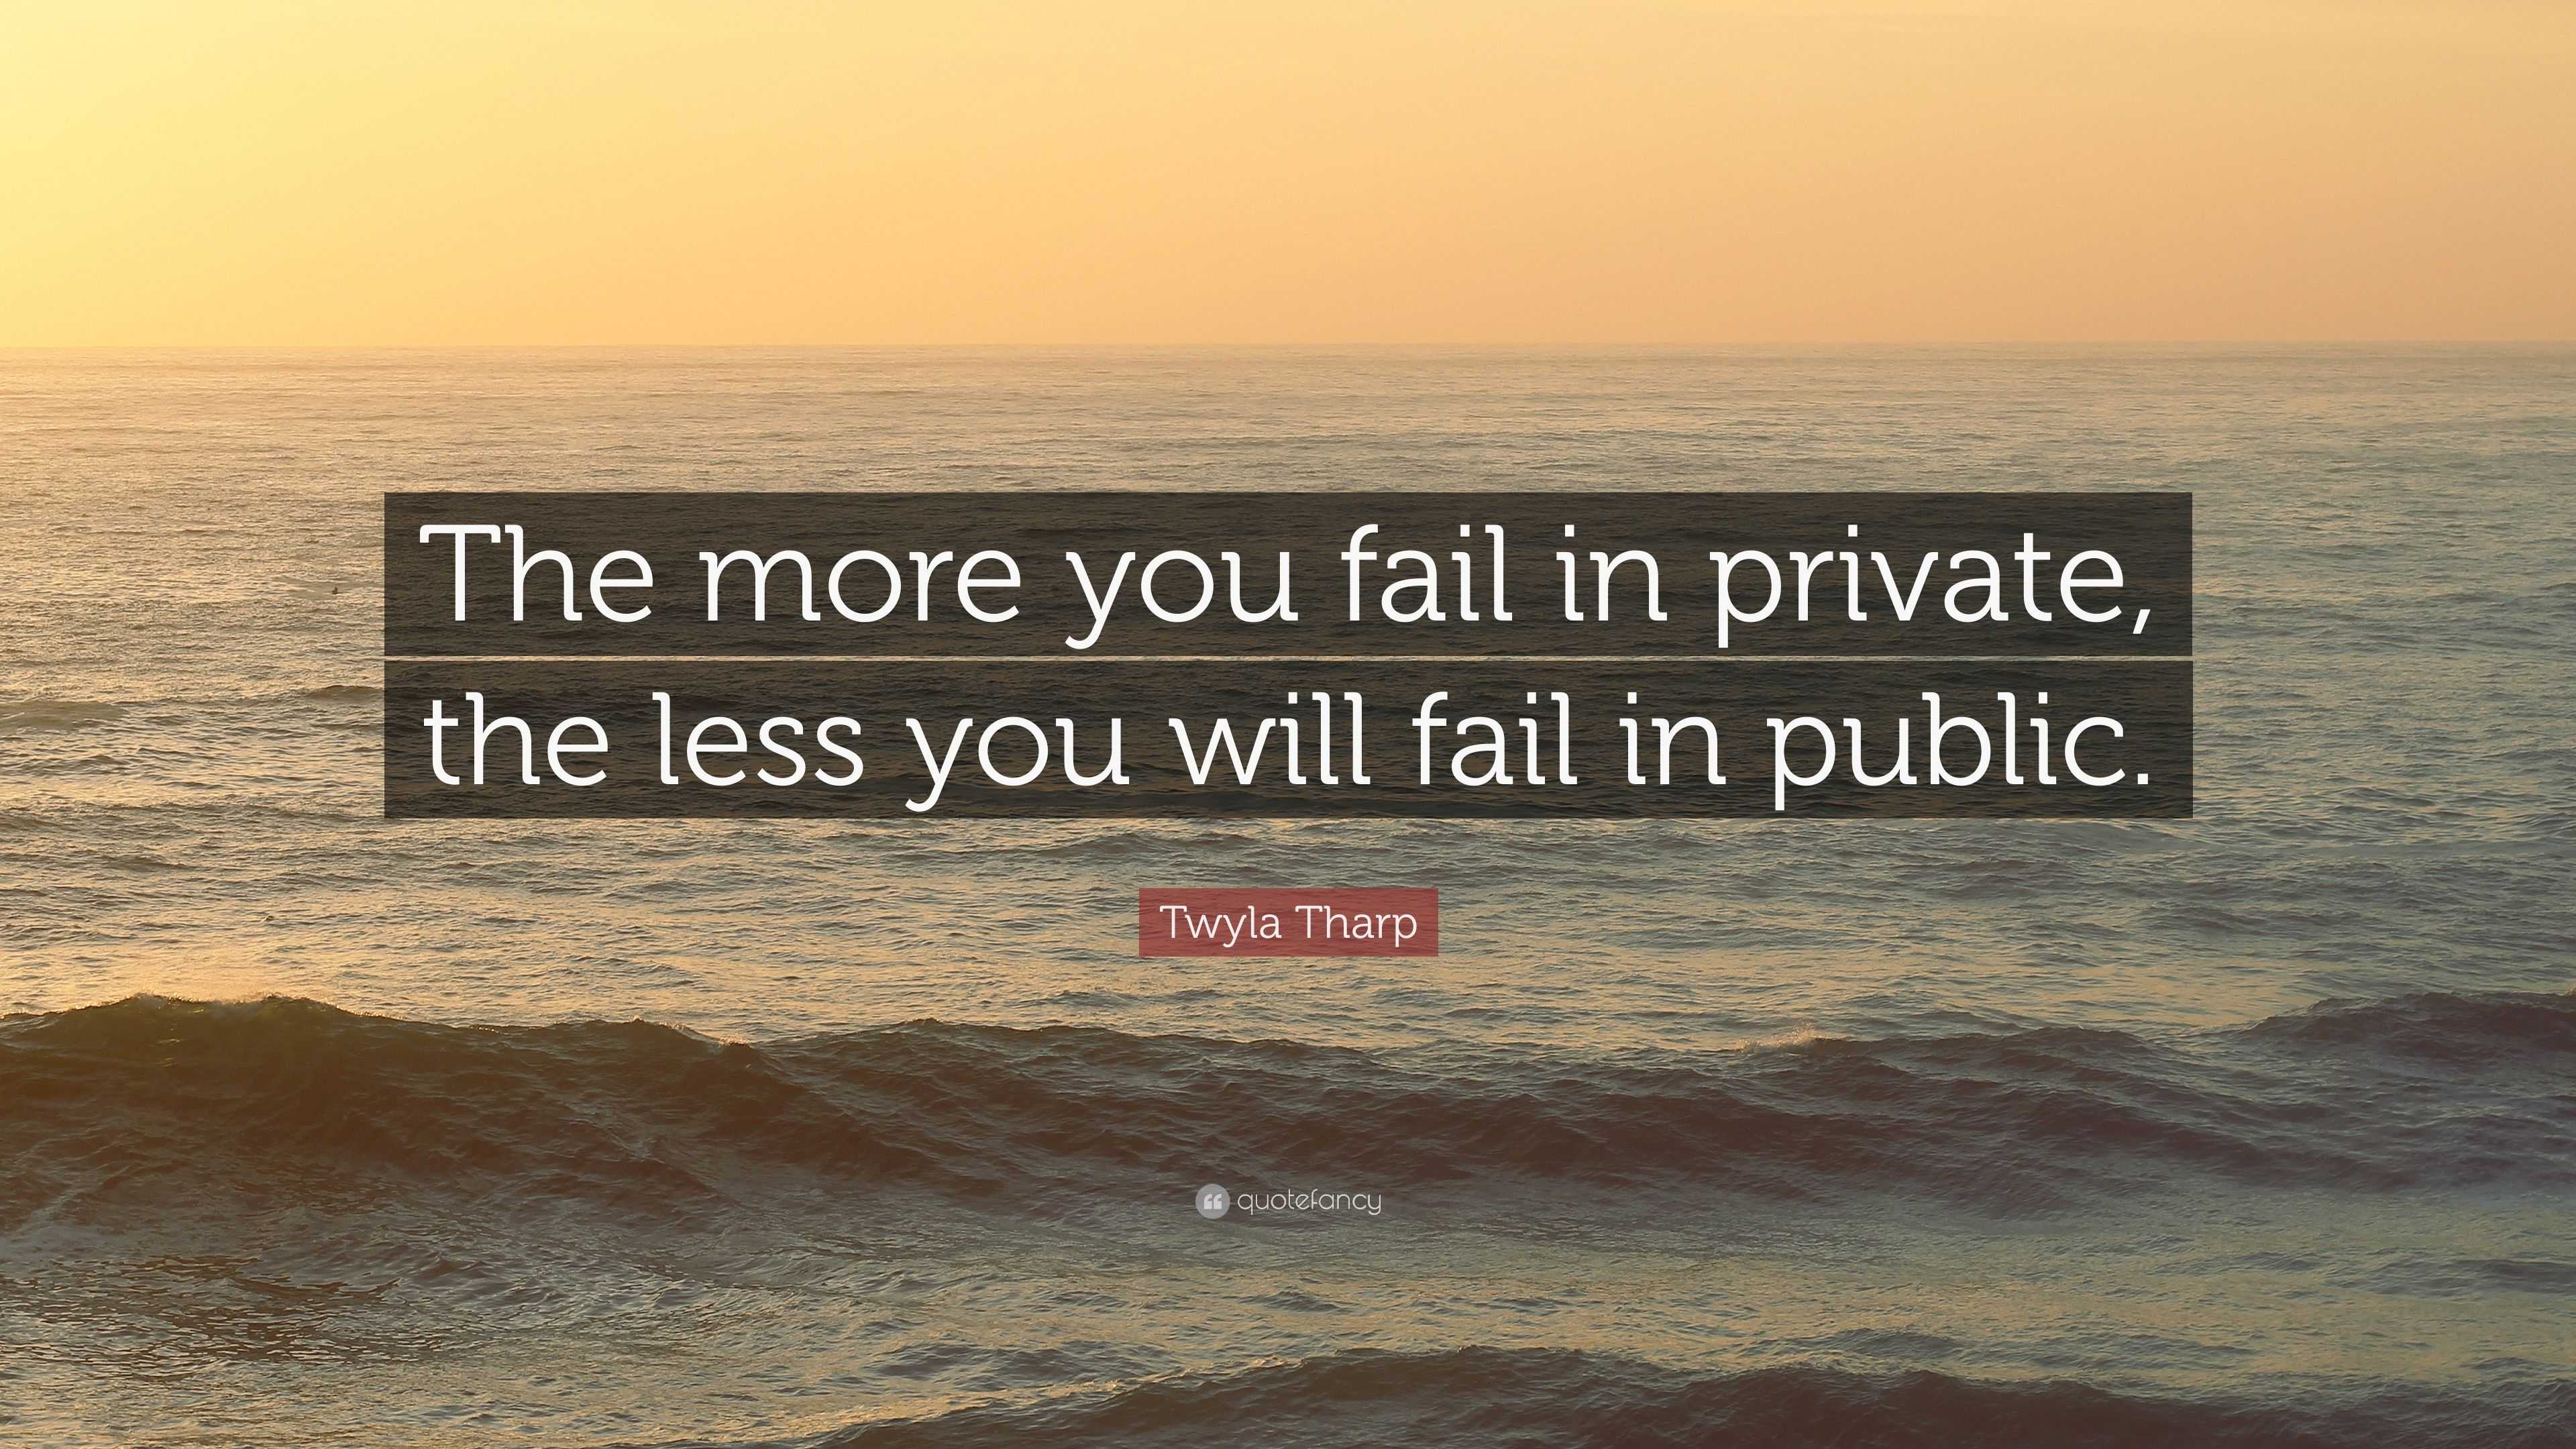 Twyla Tharp Quote: “The more you fail in private, the less you will